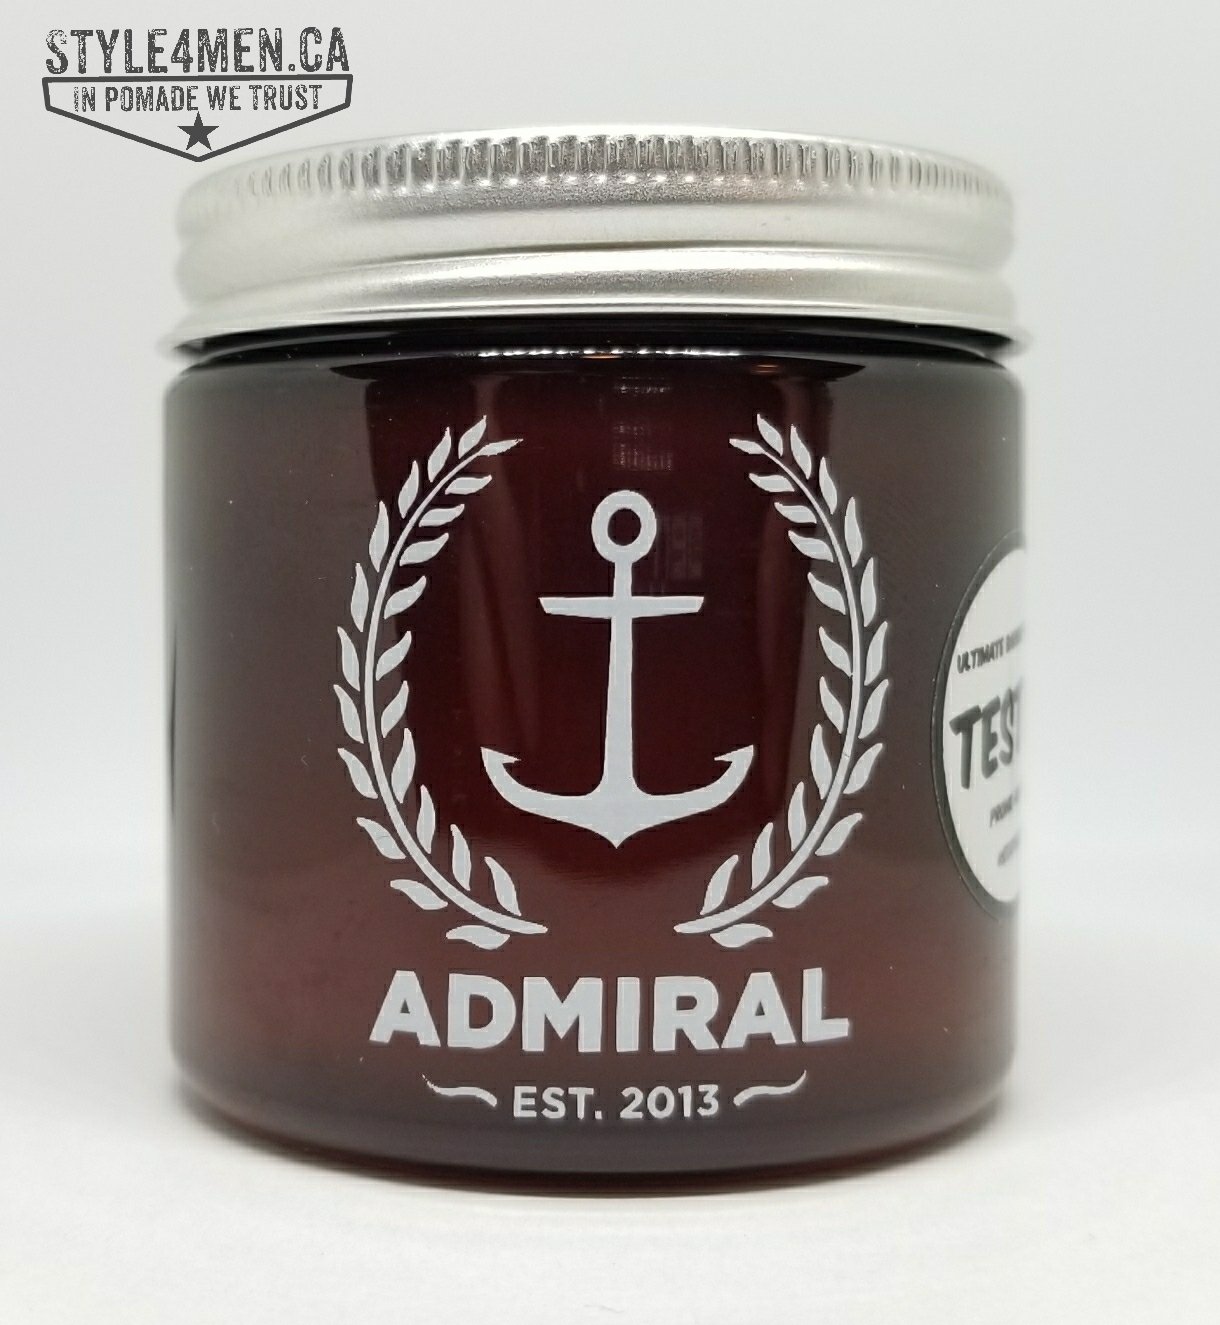 Admiral Deluxe Pomade